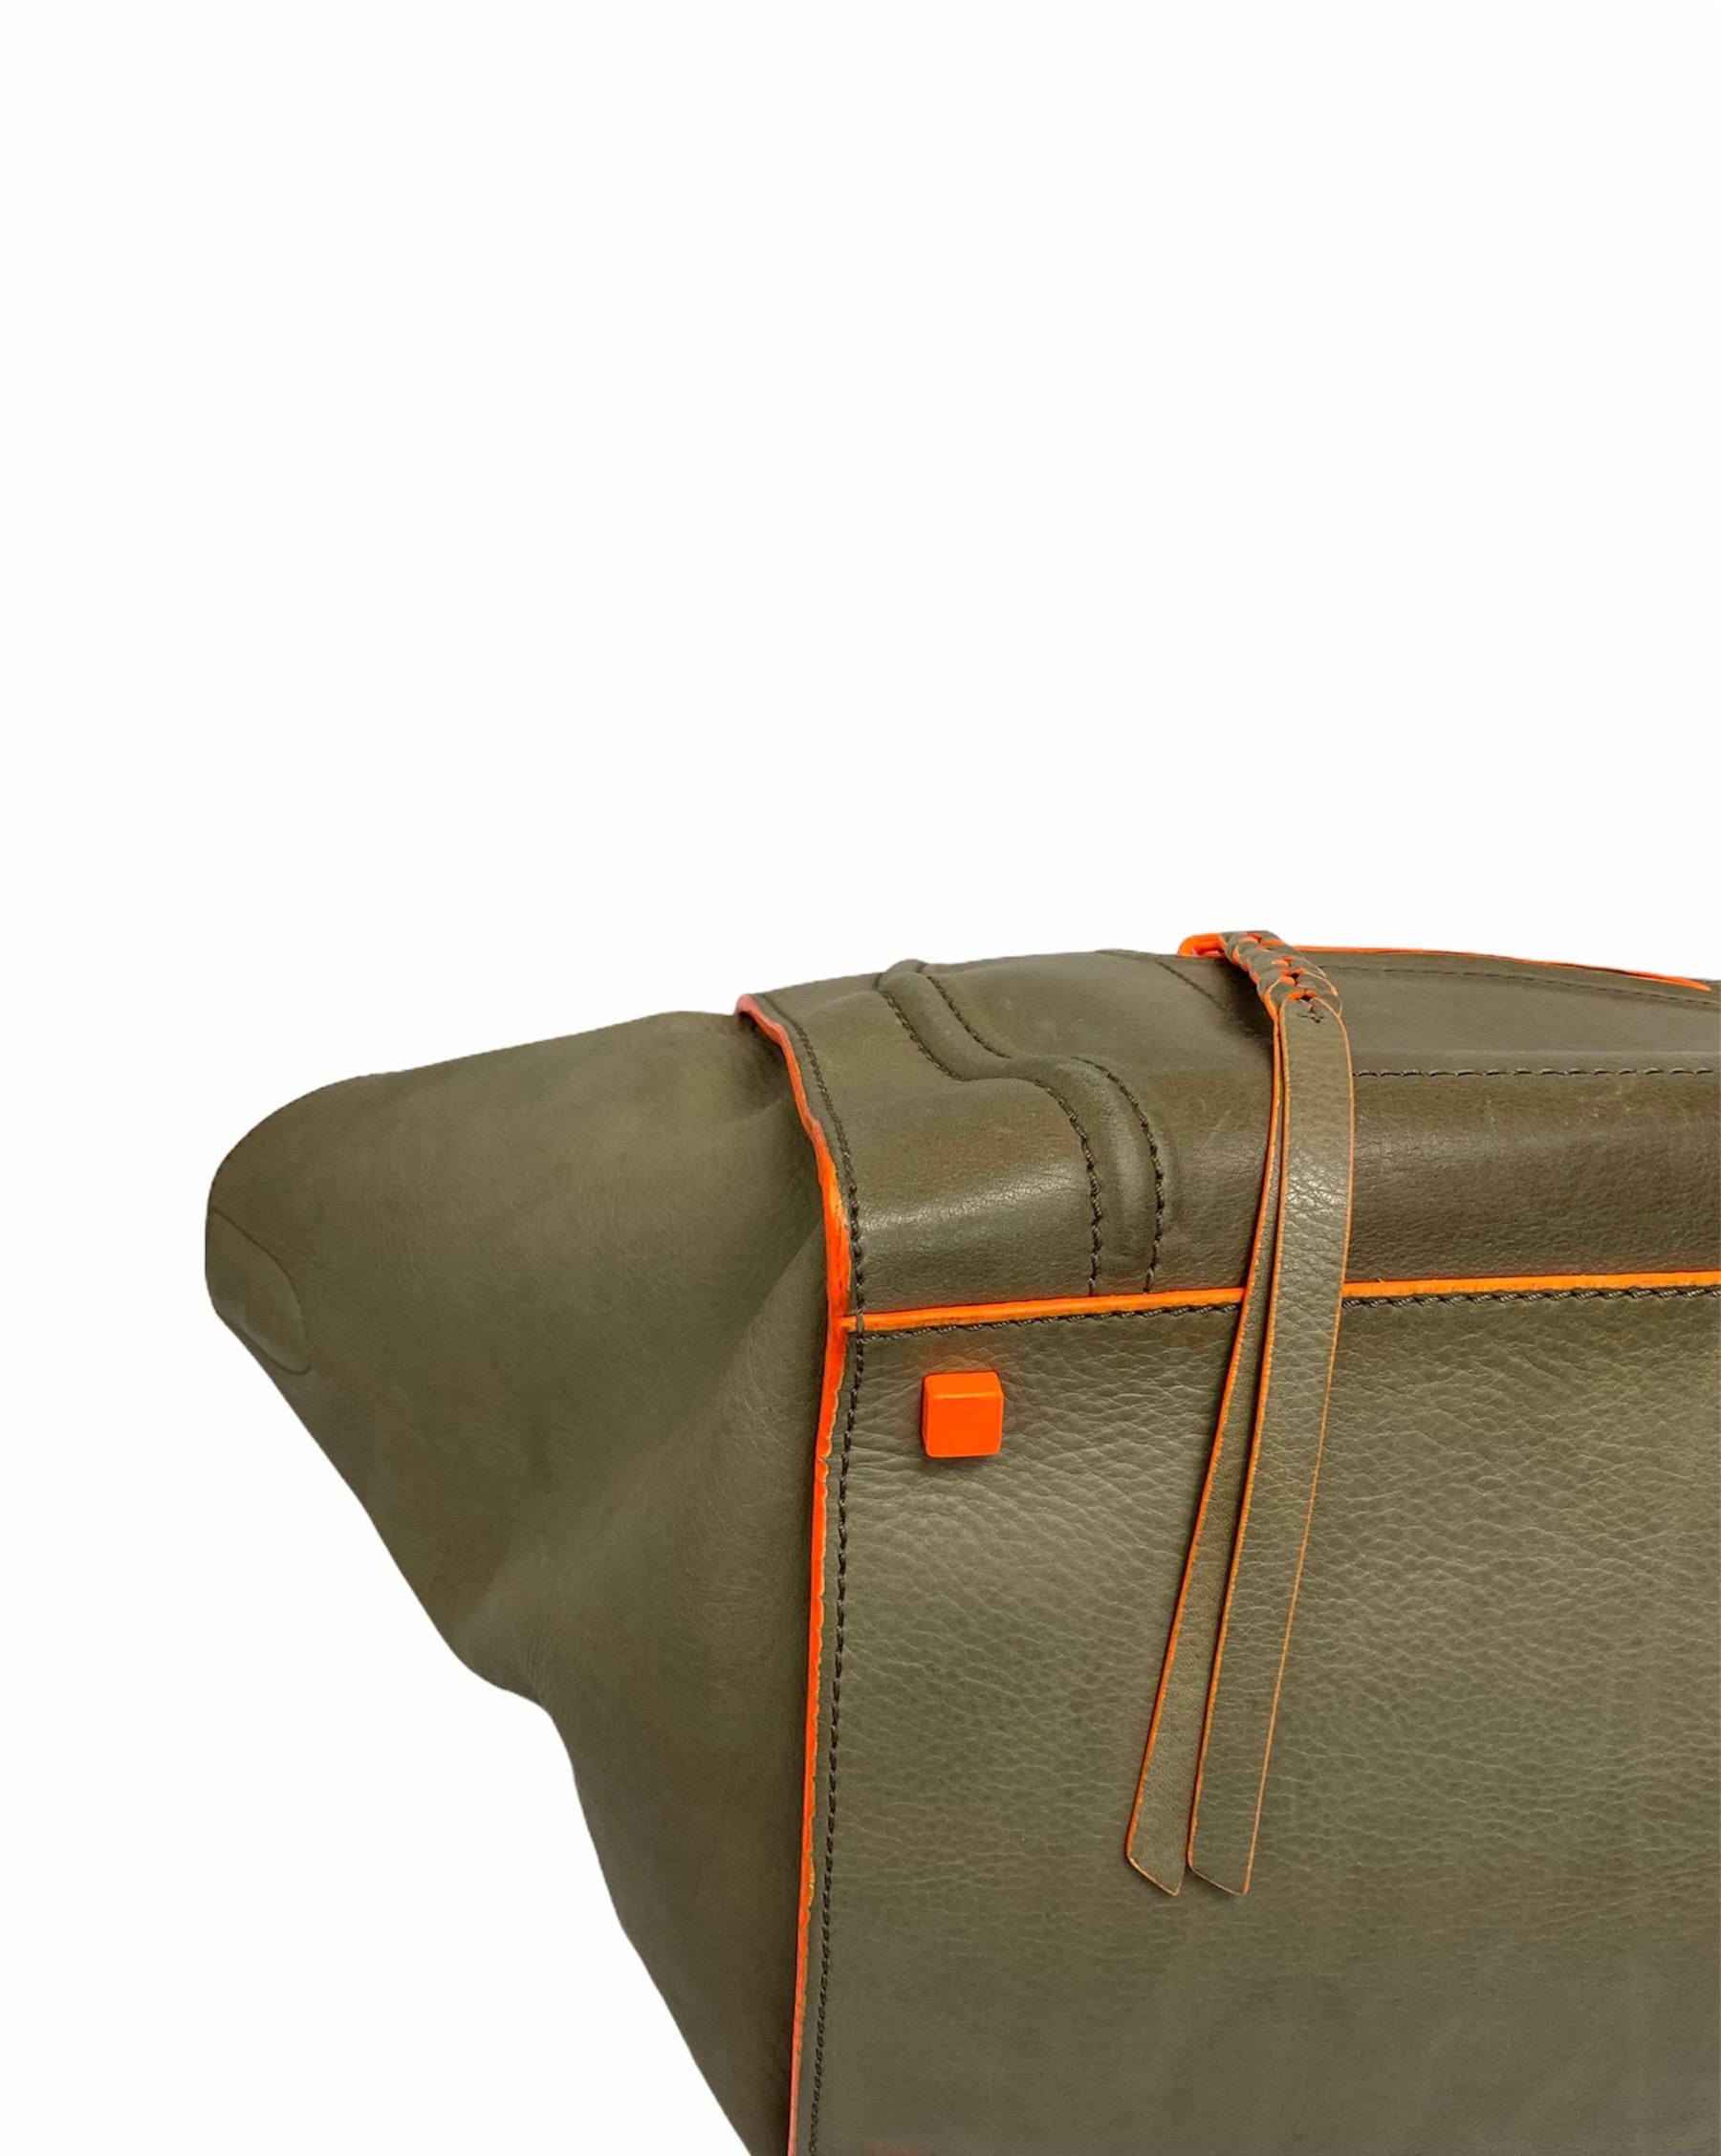 Women's Cèline Luggage Phantom Bag in Gray Leather with Fluorescent Orange Inserts